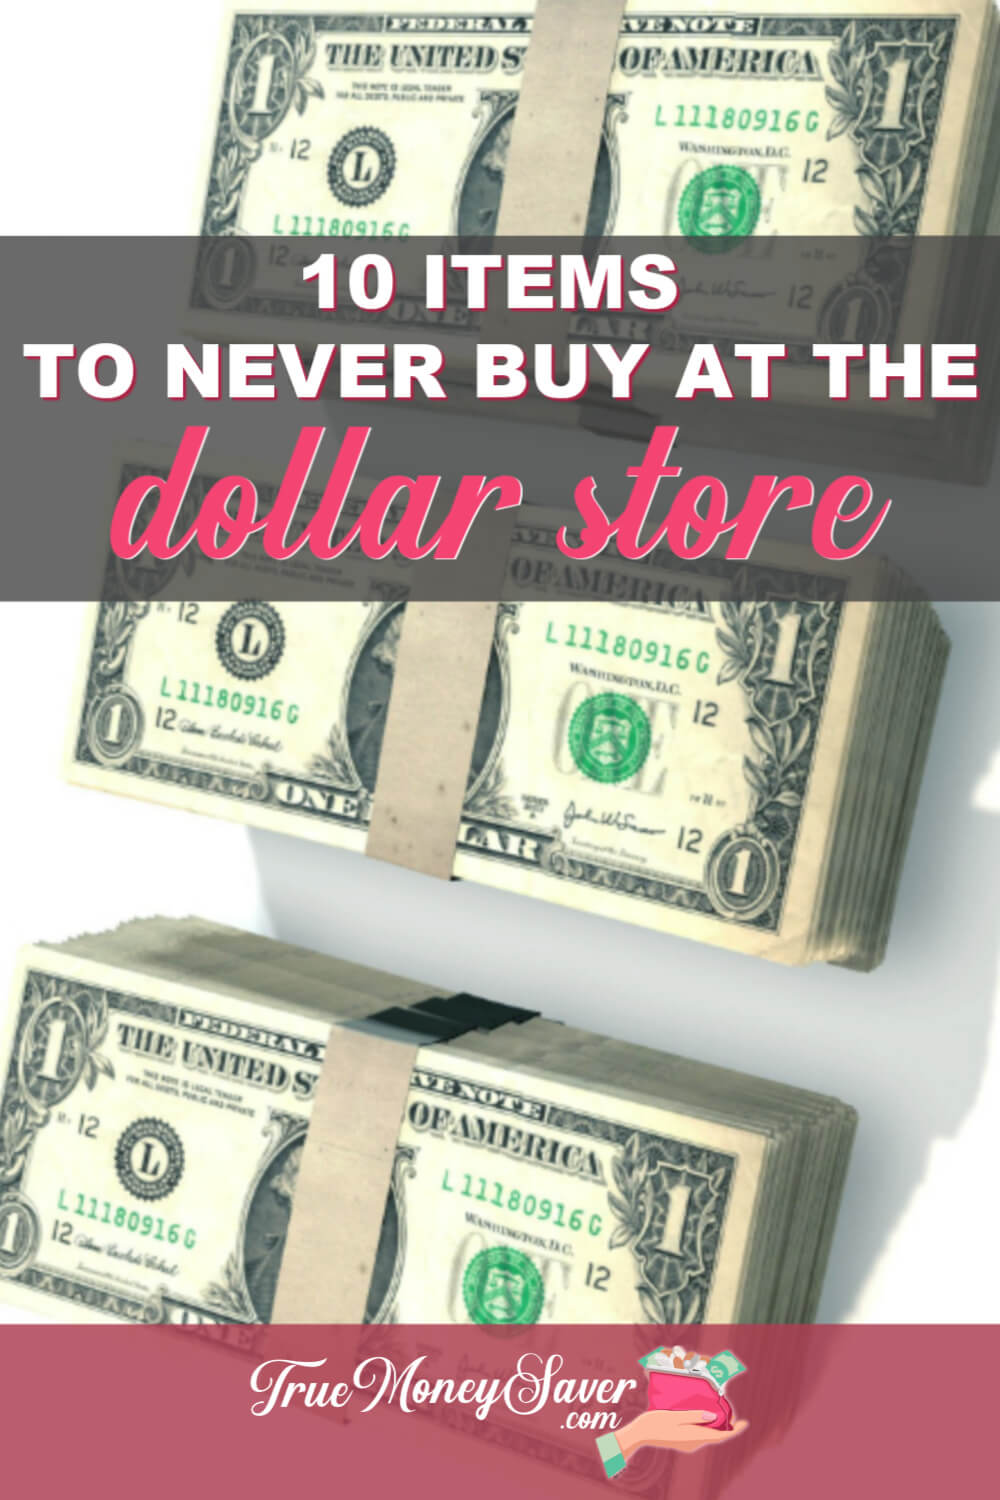 Ten Items You Should NEVER Buy At The Dollar Store